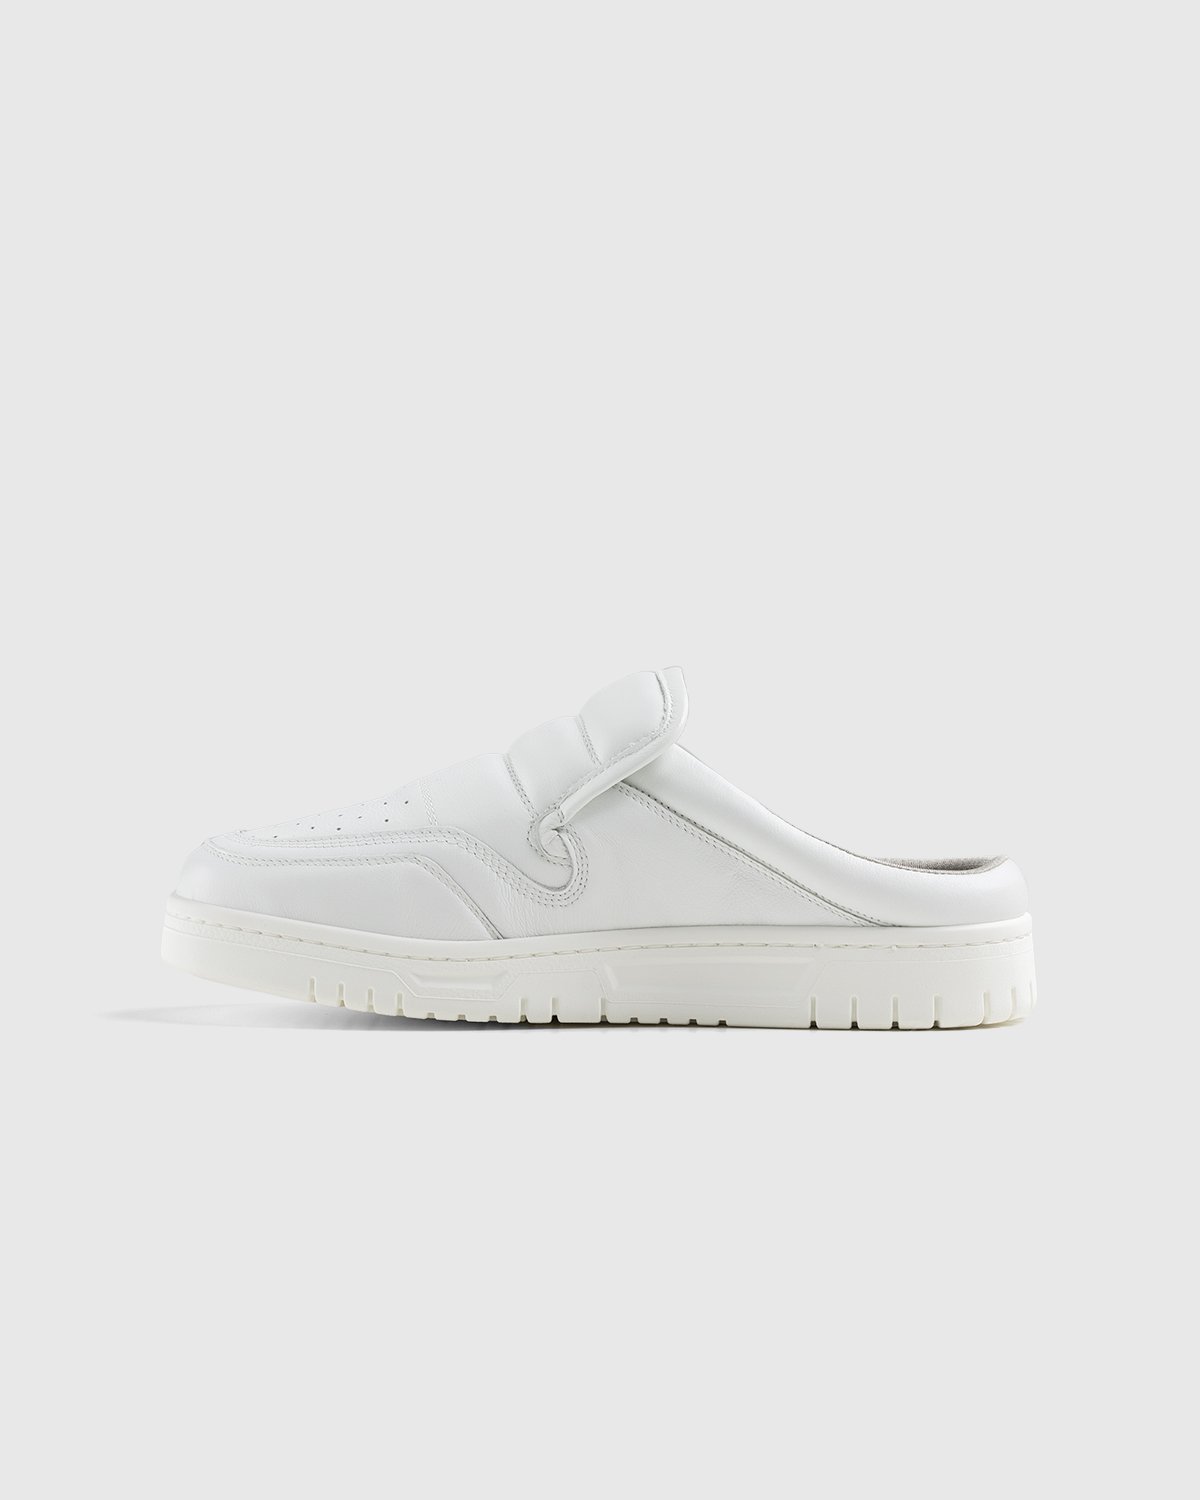 Acne Studios - Cow Leather Mule White - Footwear - White - Image 2